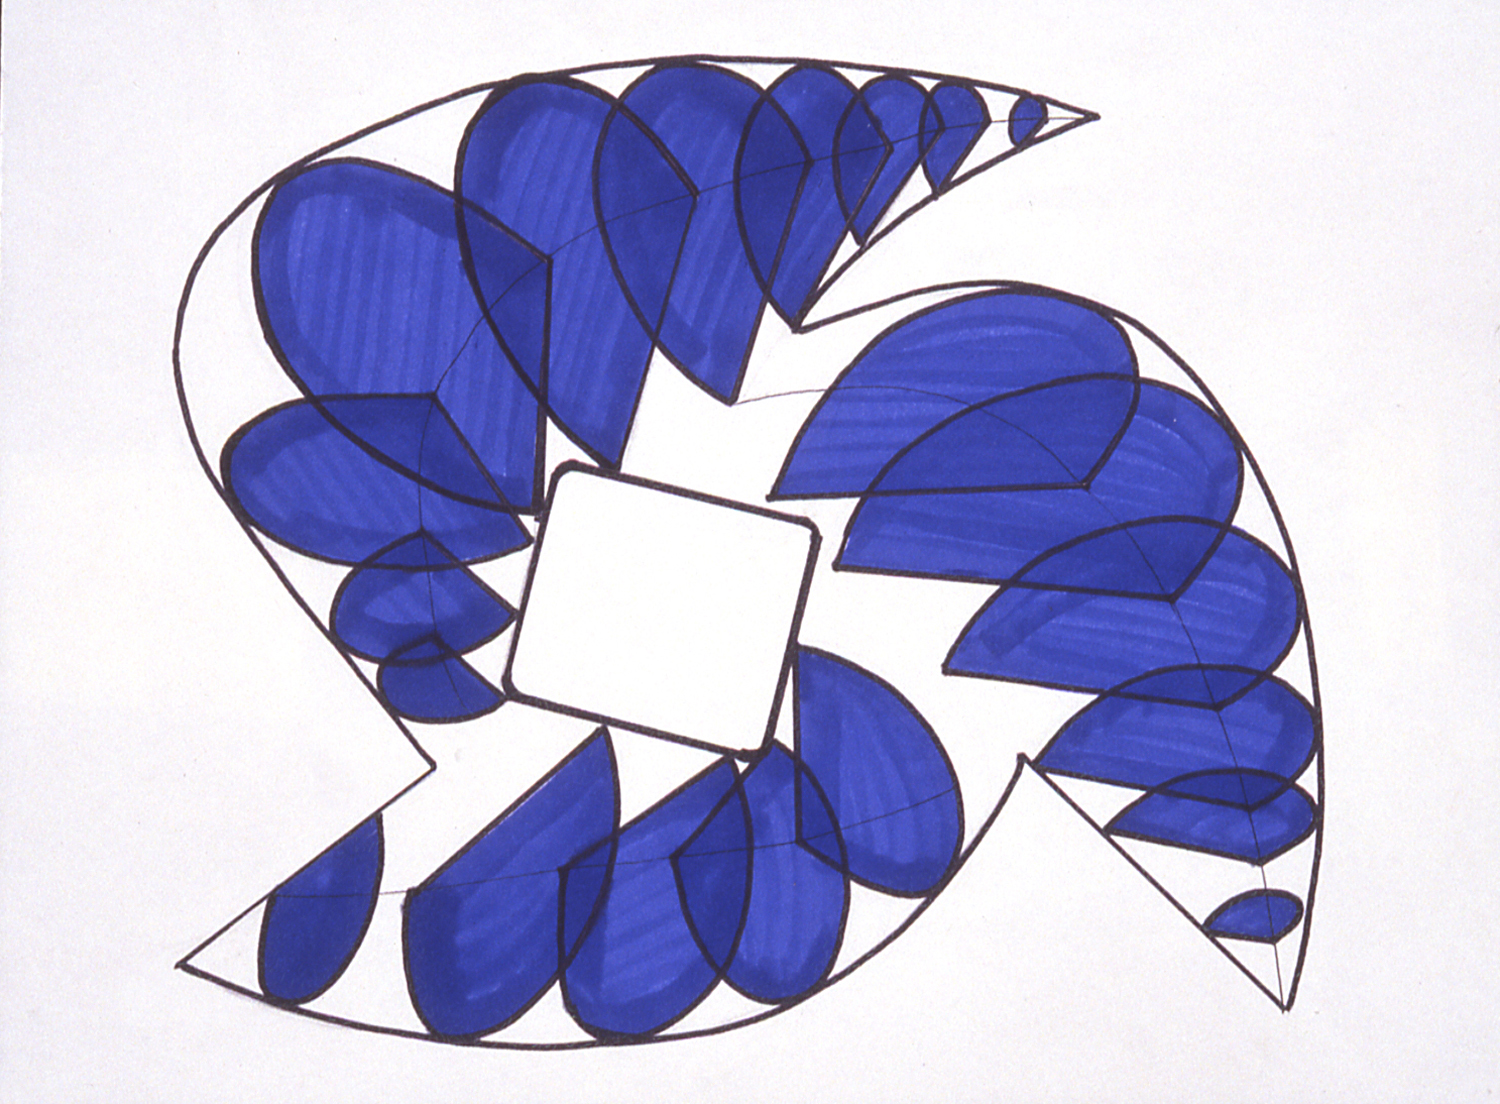  Own Momentum, 1999 Permanent marker on 100% rag paper 14x17 inches / 36x43 cm 